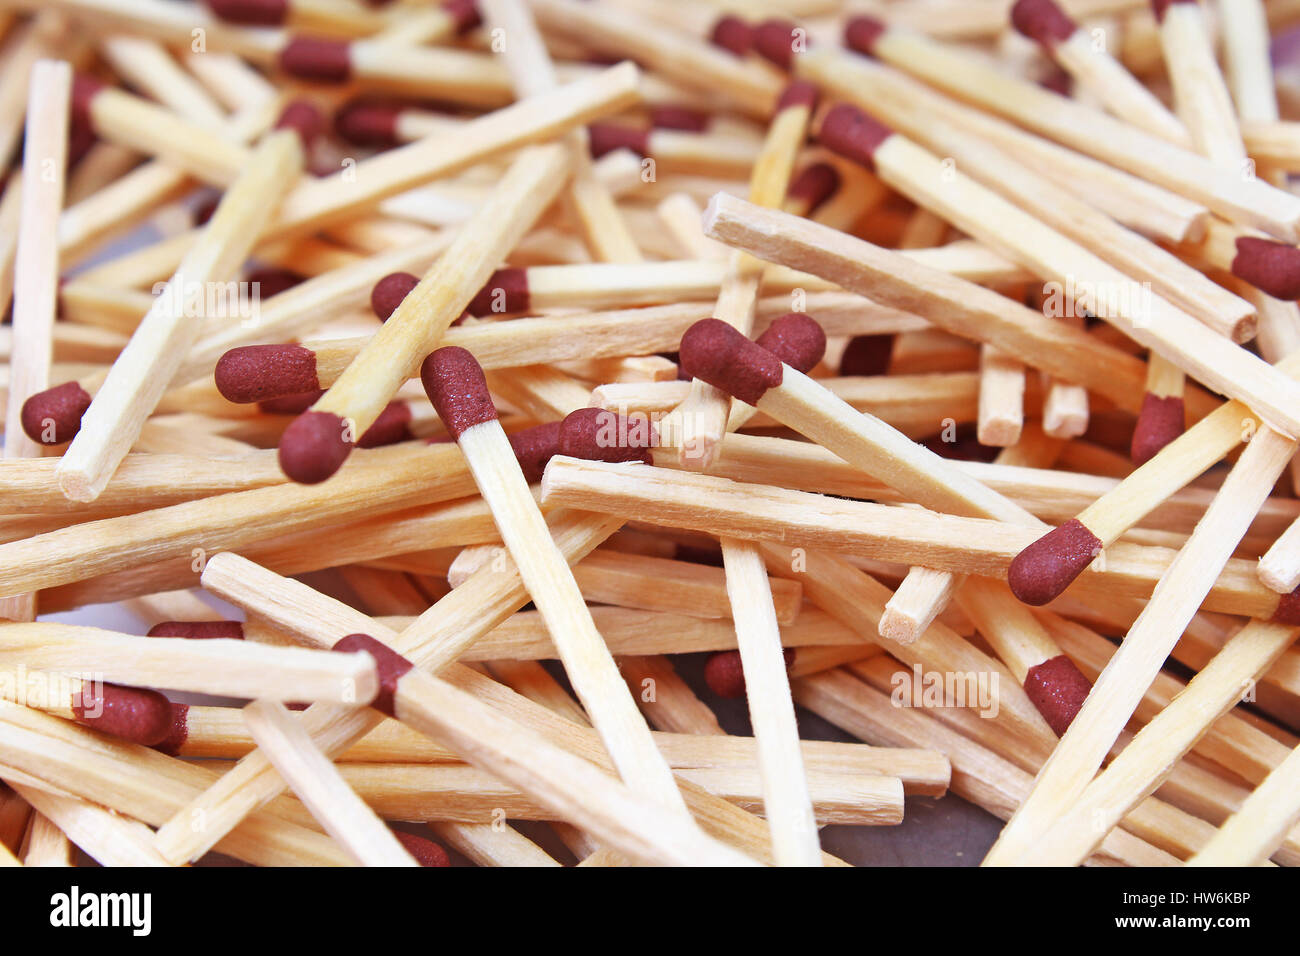 Match sticks with brown heads in a row. Fire Matches texture pattern concept. Stacked matches as background Stock Photo